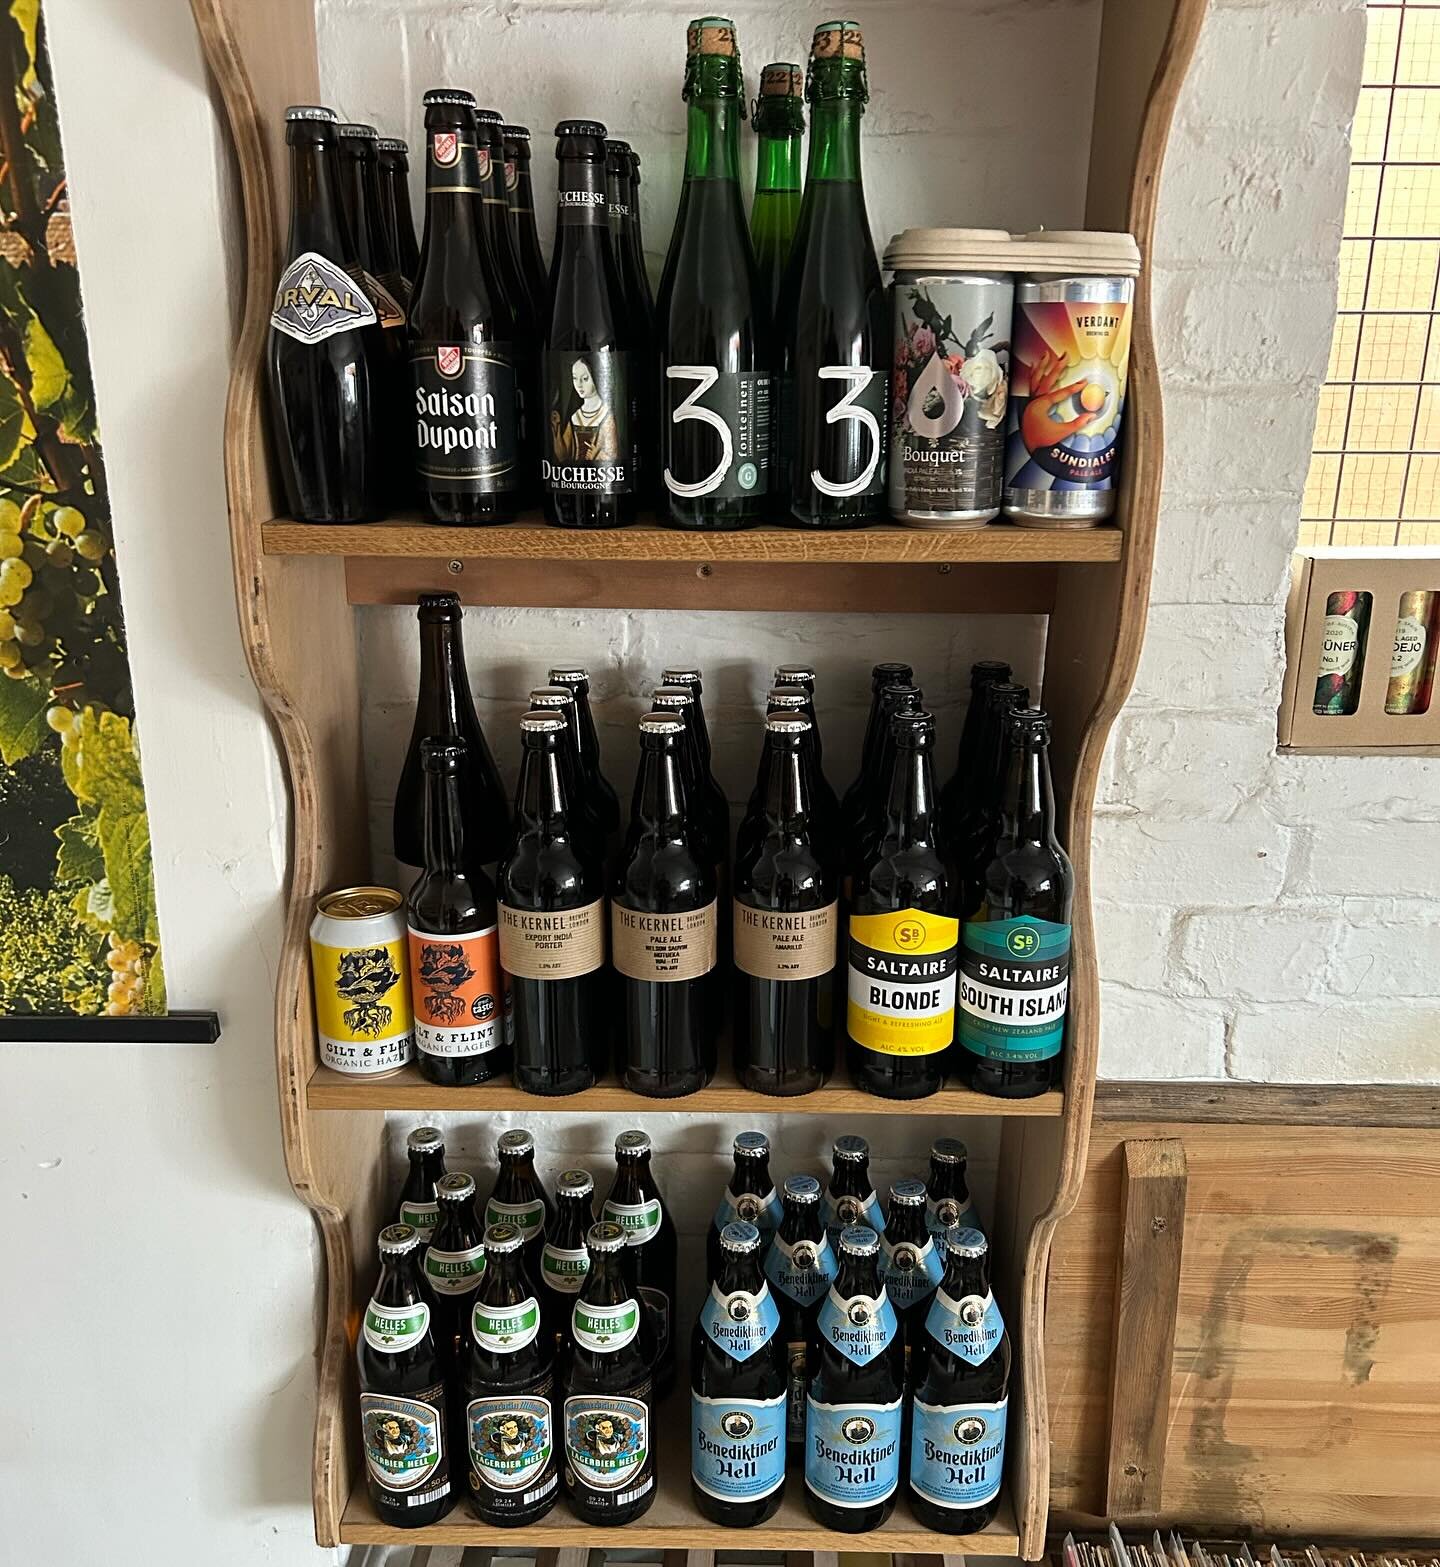 New beers are here! 🍺 From Munich Helles and bottle conditioned English IPA to Lambic and Saison. We&rsquo;ve carefully chosen beers that are hard to find locally or that we just love. Everything will be available cold from next week to enjoy in the